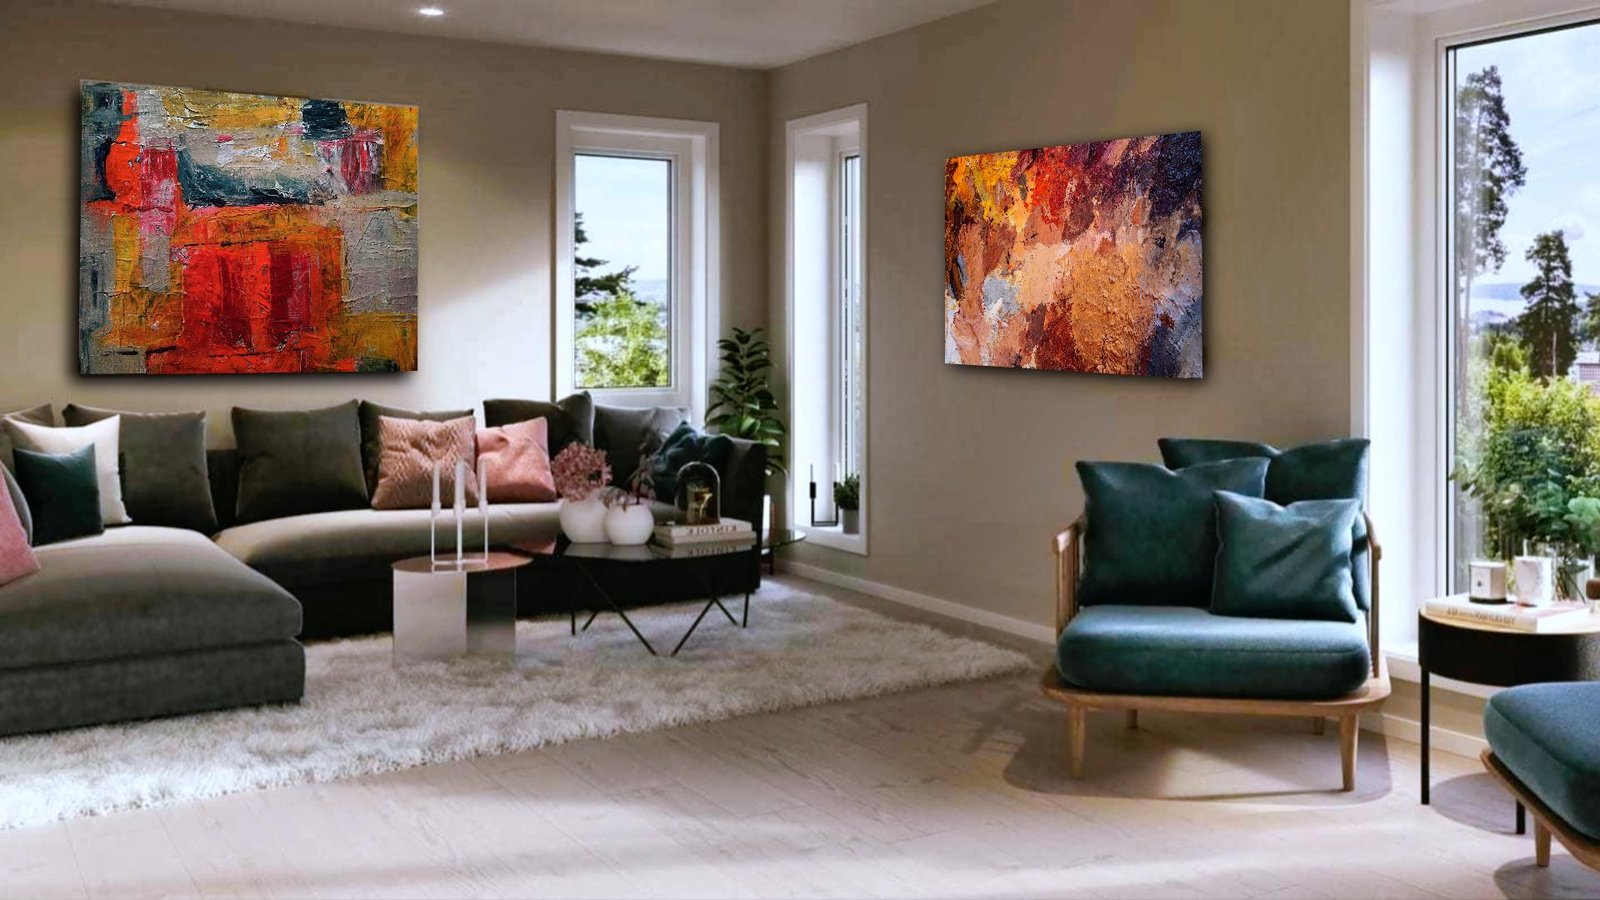 A Living Rooms Gets Character from Modern Art and Colors